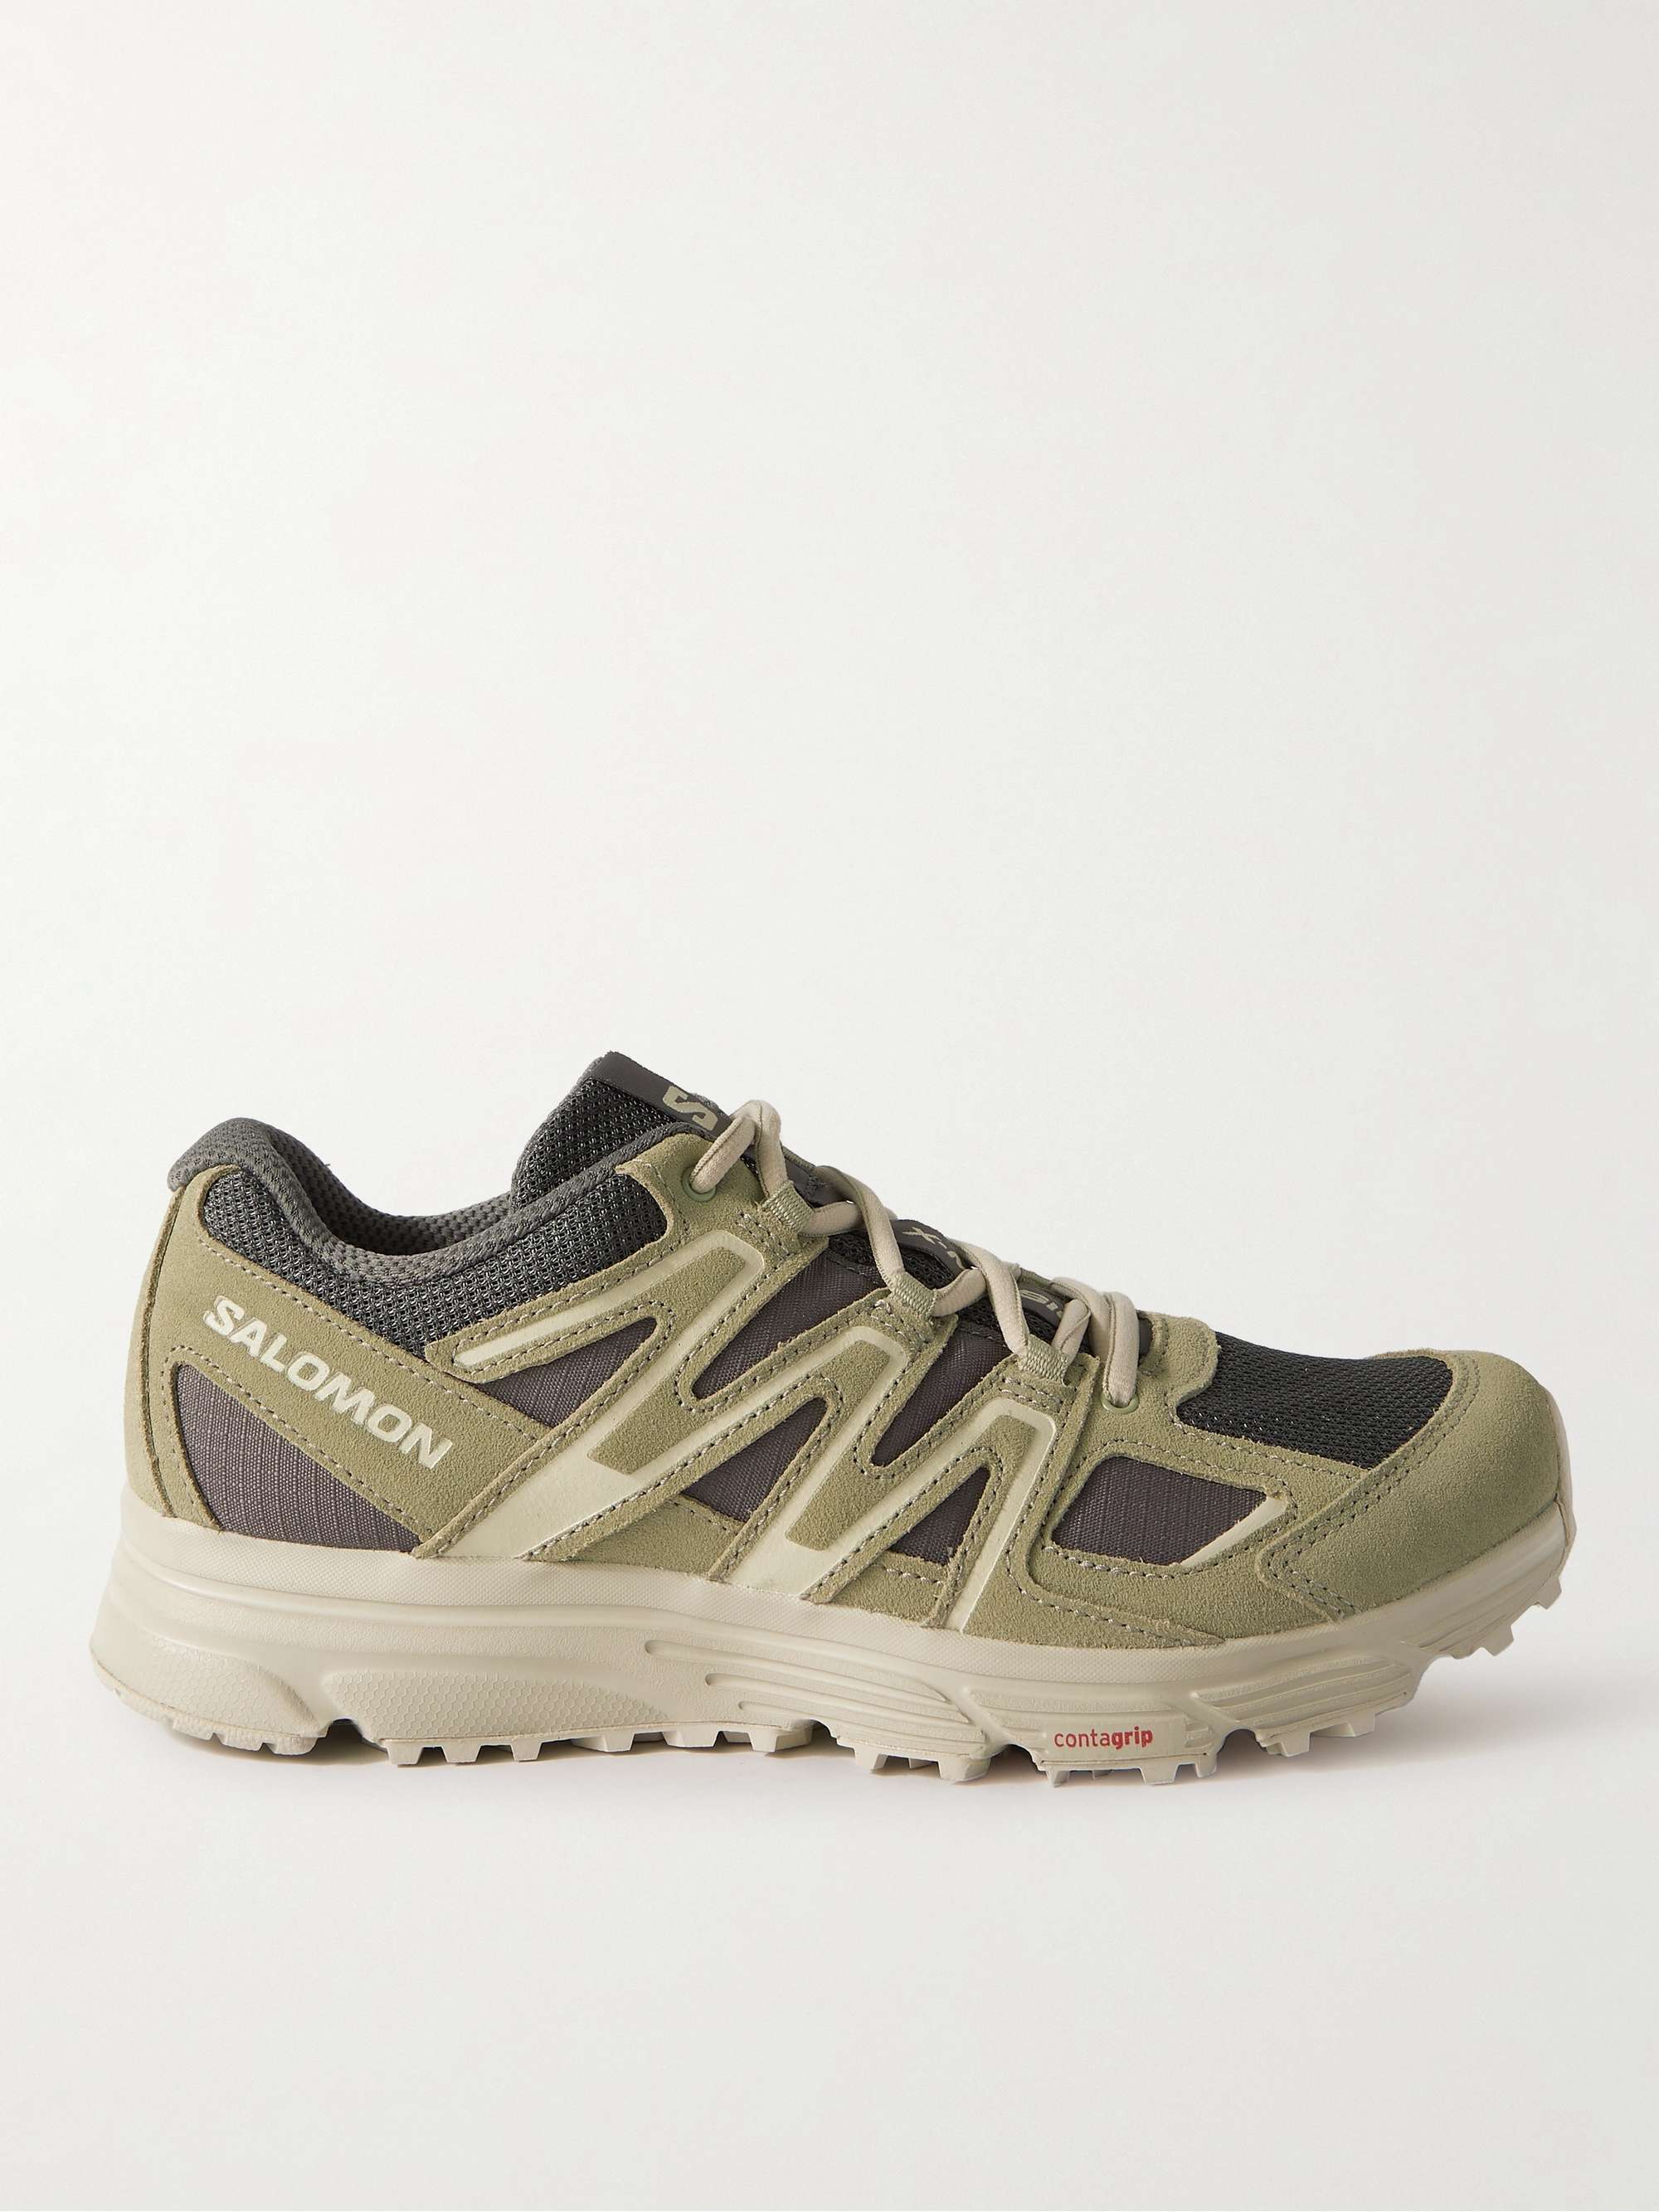 SALOMON X-Mission 4 Suede, Ripstop and Mesh Sneakers | MR PORTER